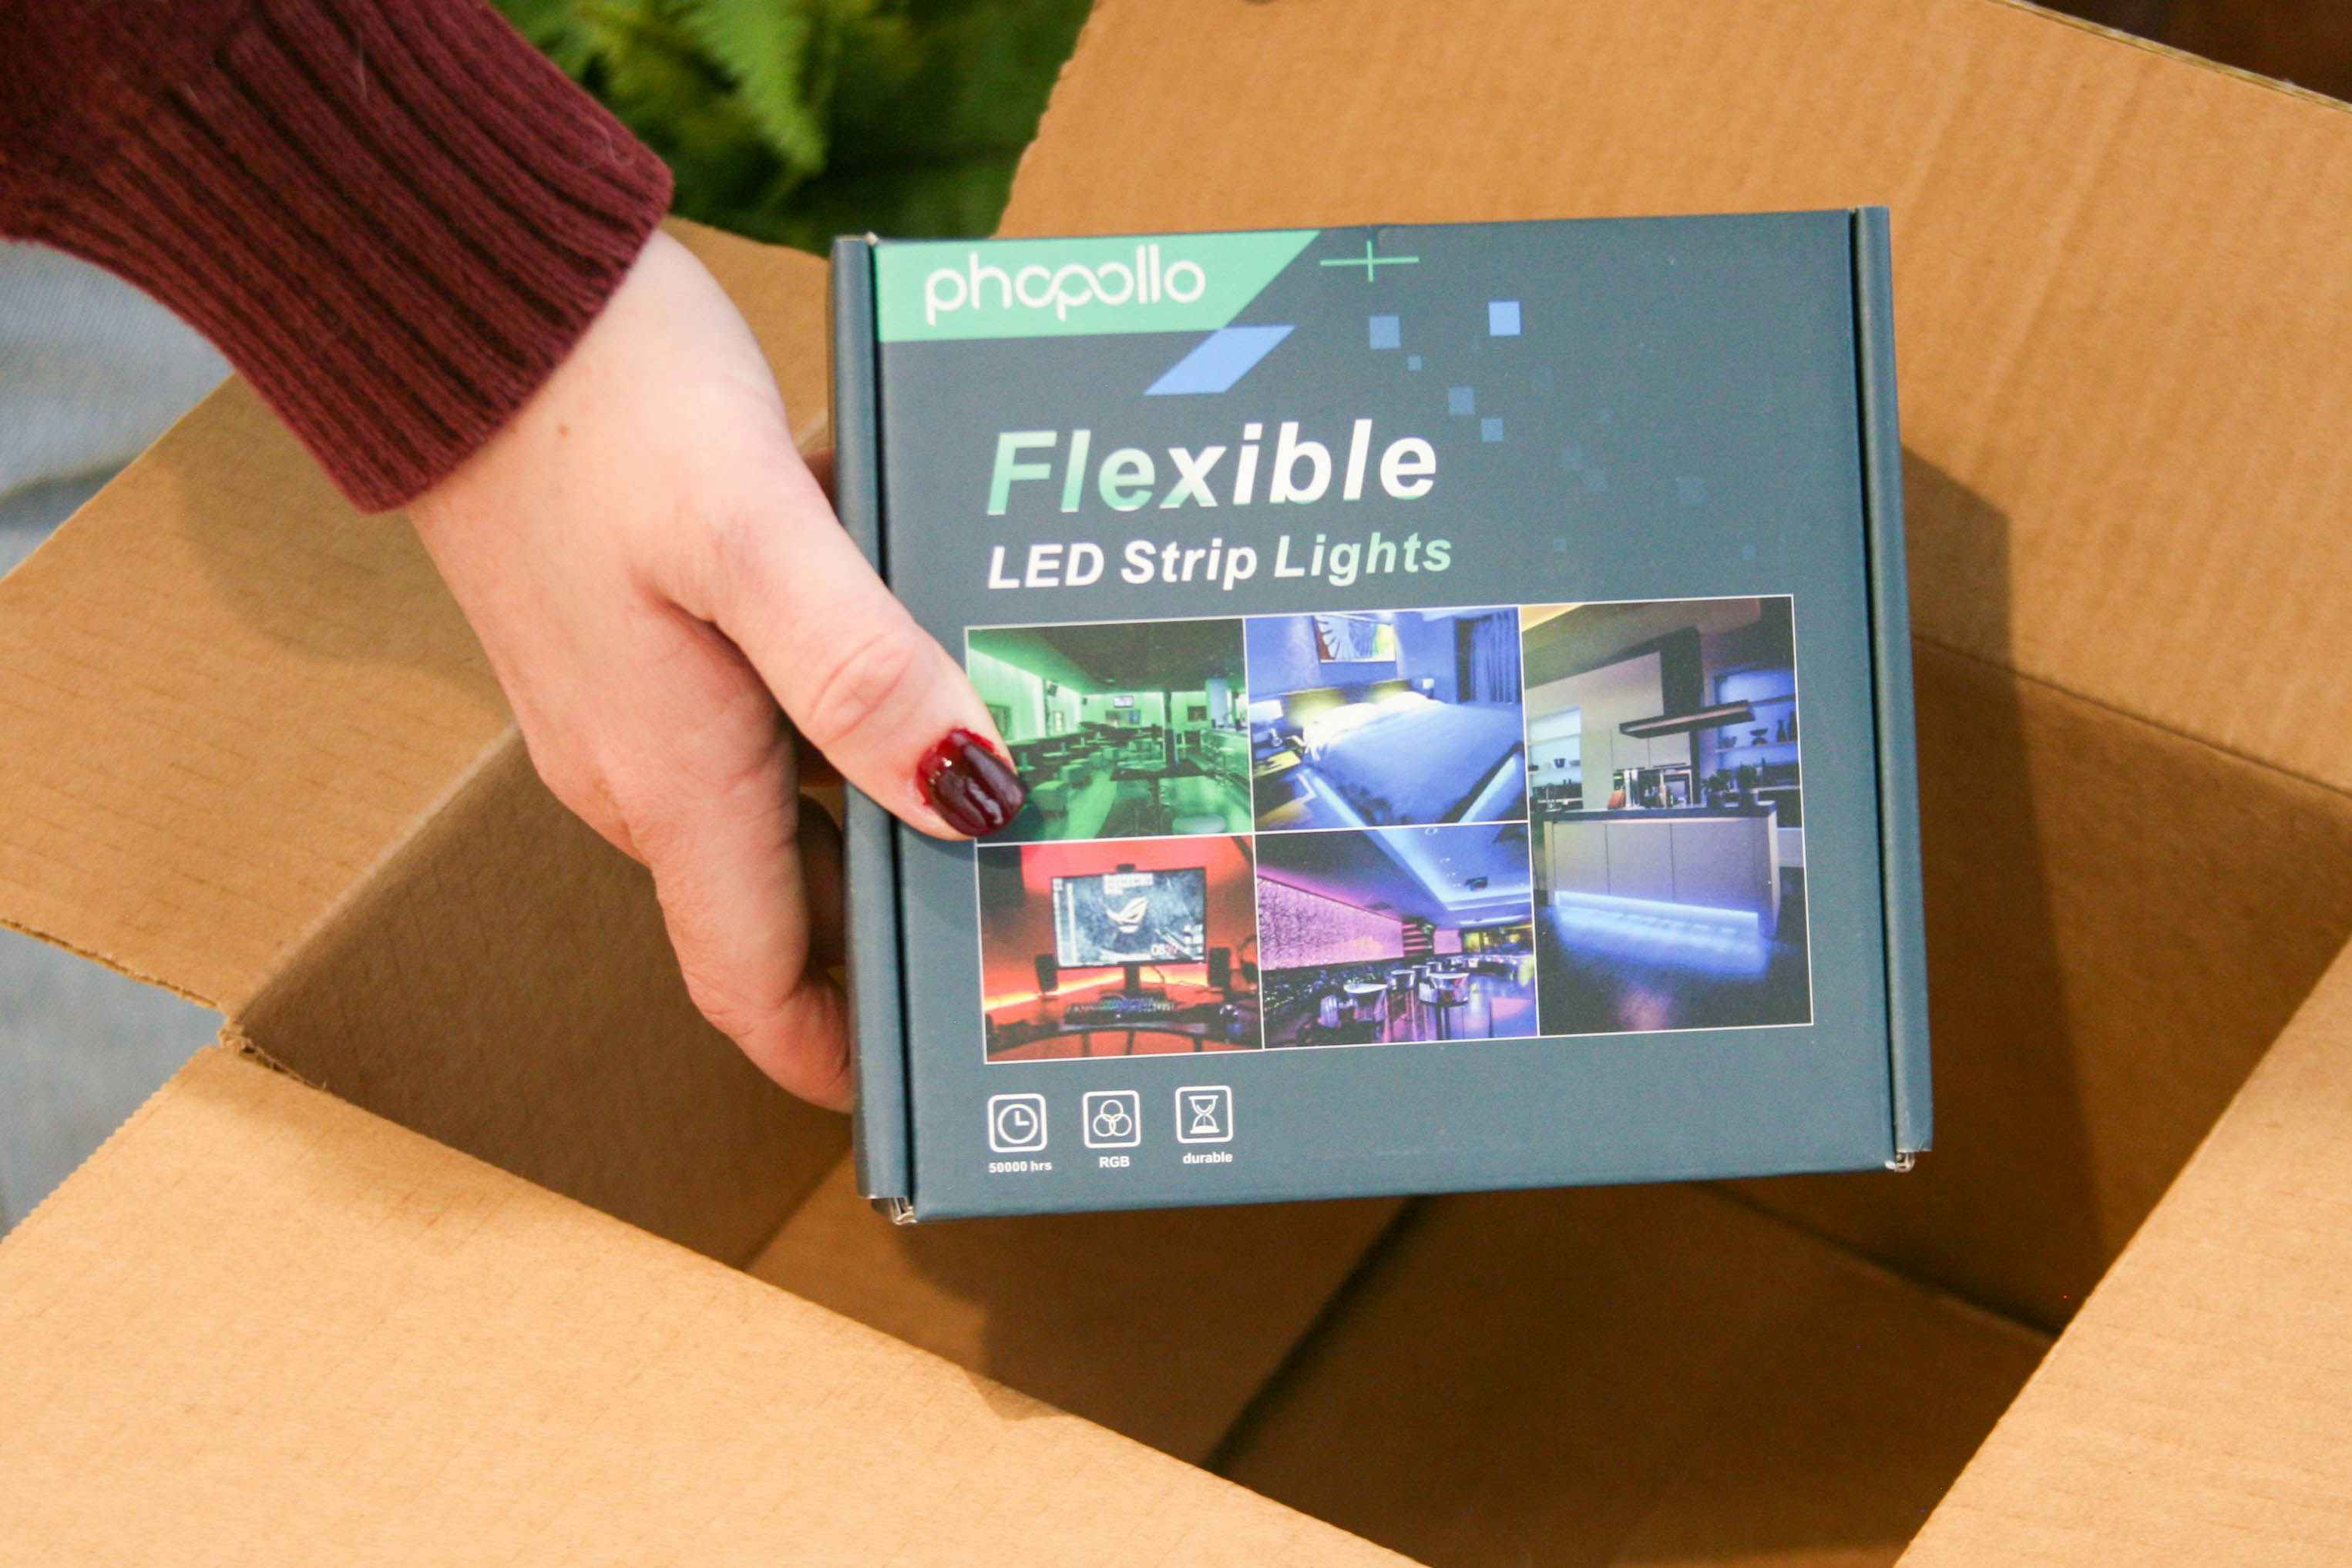 flexible led strip lights being held out of box